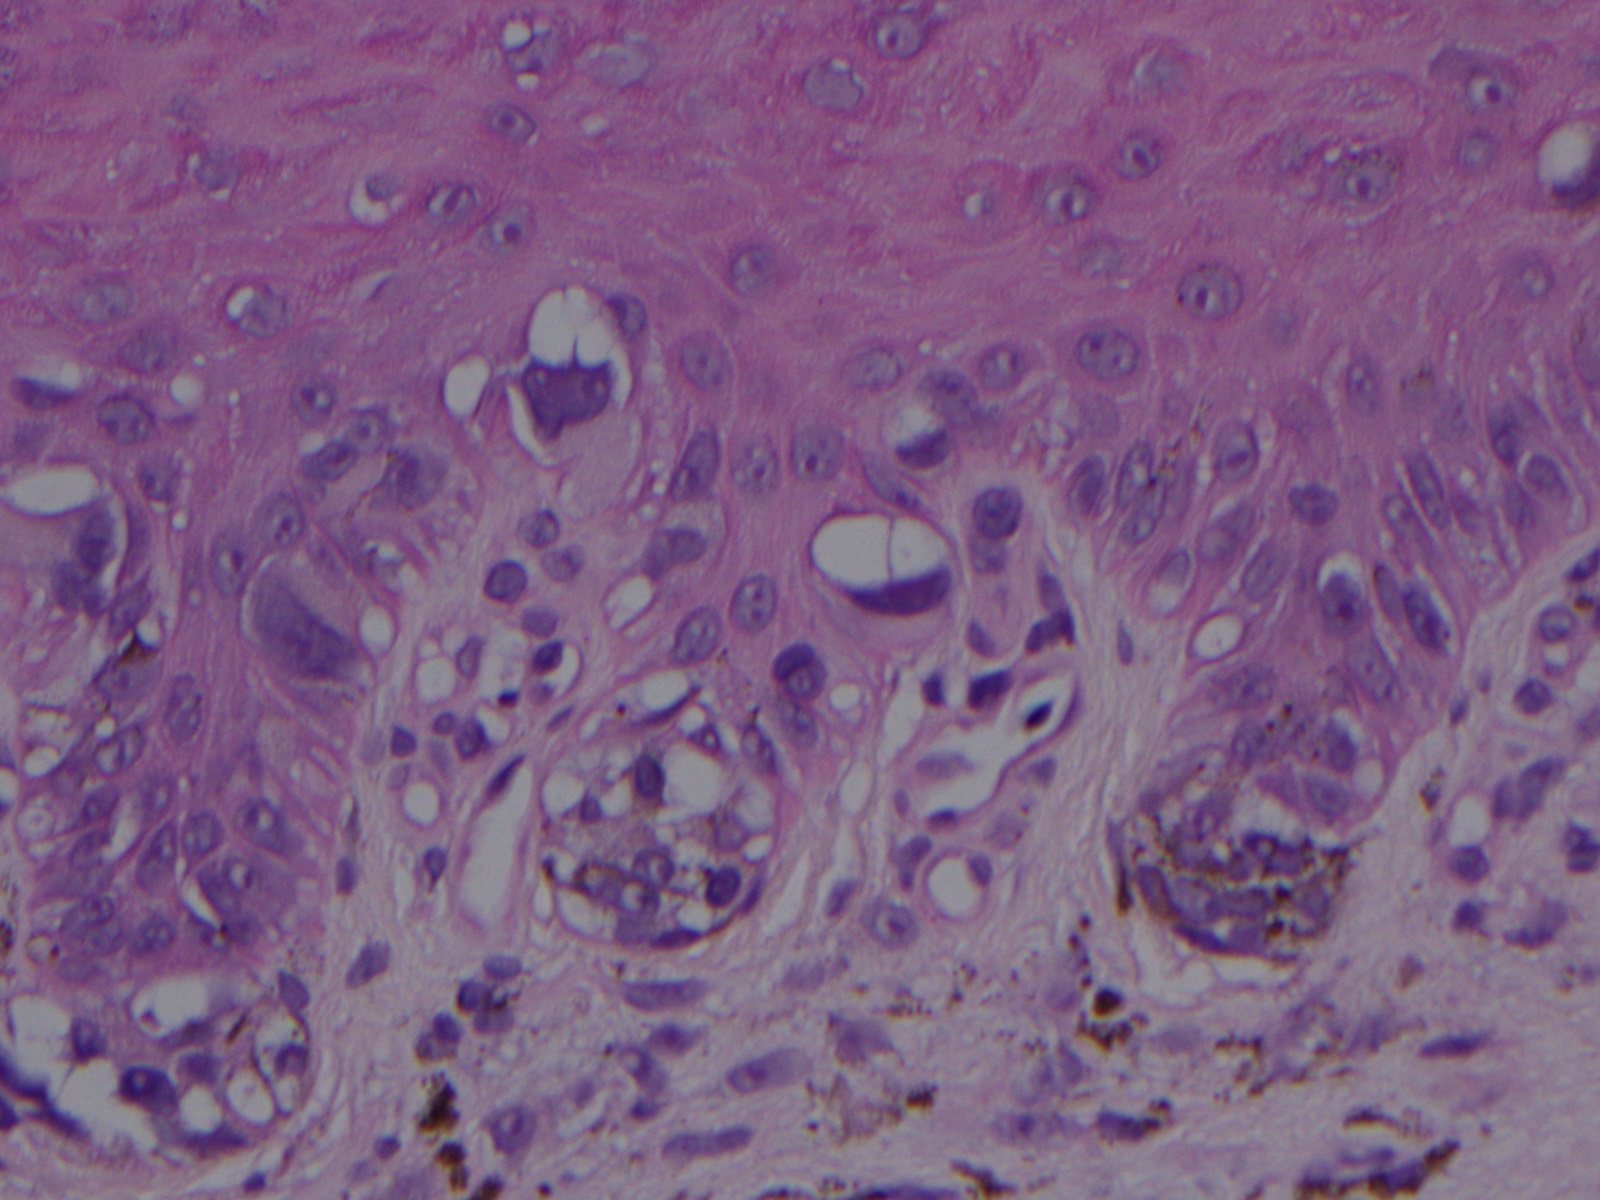 This Hematoxylin and Eosin stained section of an acral lentiginous melanoma in-situ shows large atypical melanocytes with pleomorphic and hyperchromatic nuclei arranged along the dermal-epidermal junction